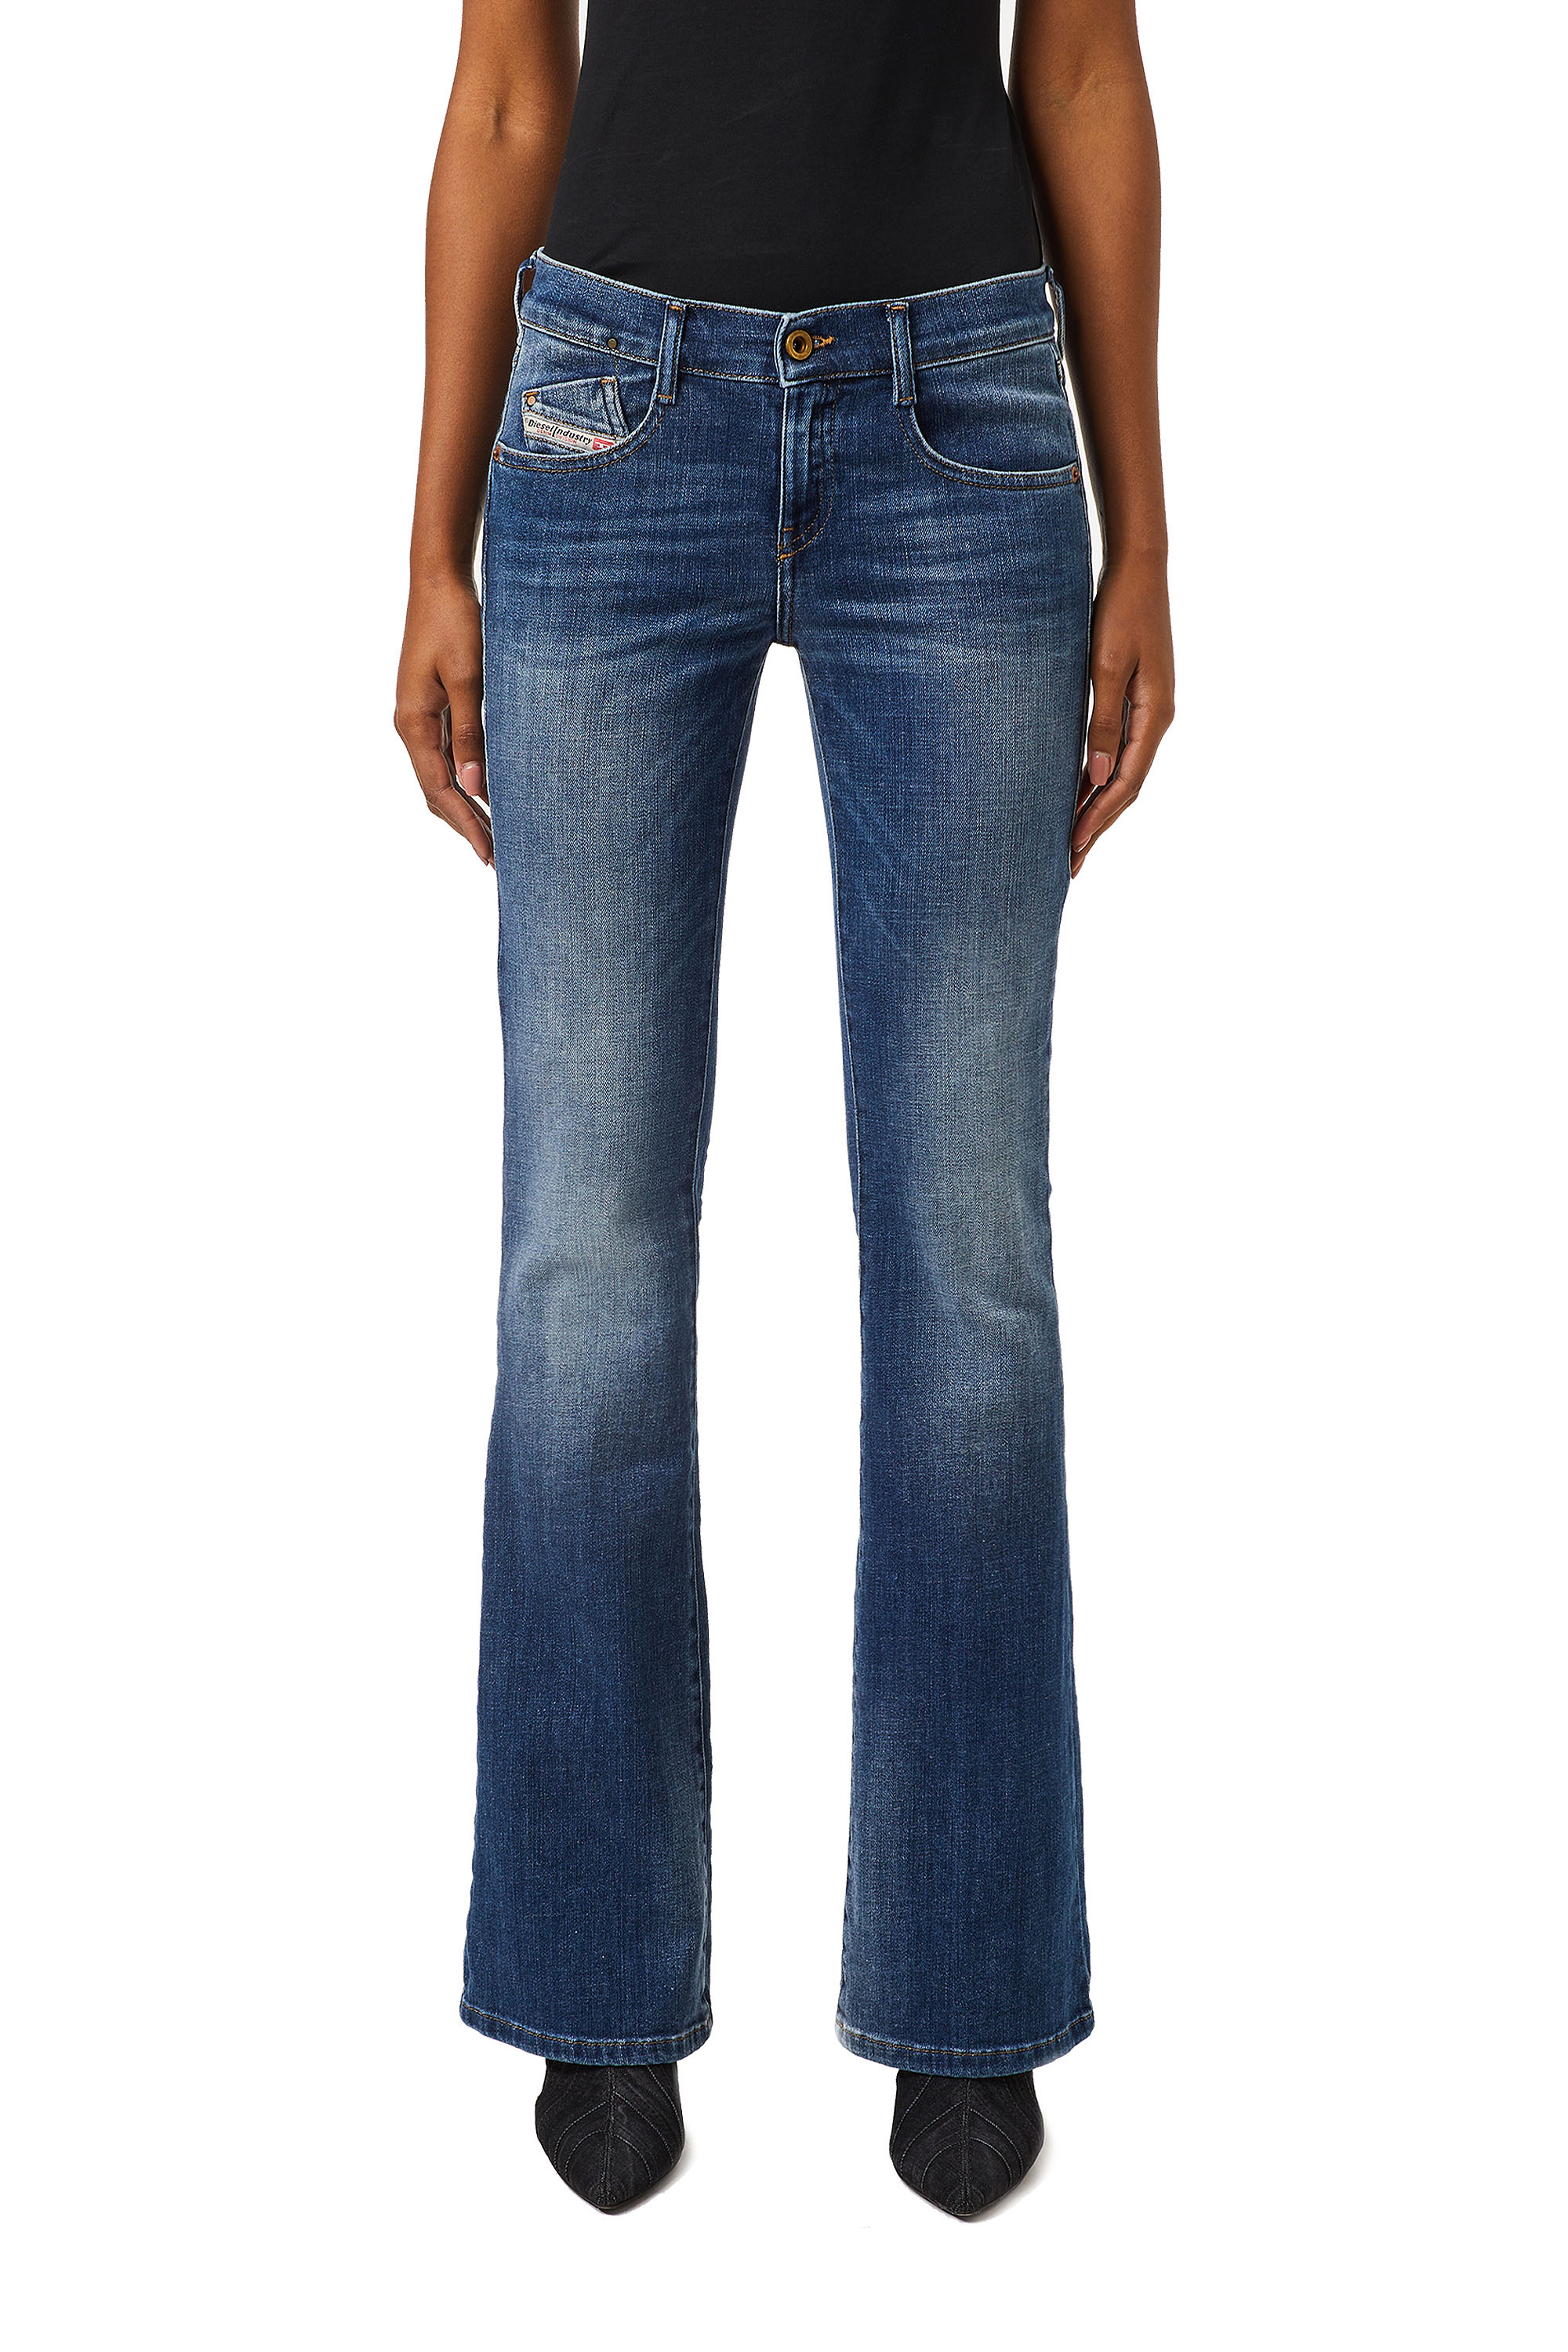 1969 D-EBBEY 086AM Bootcut and Flare Jeans,  - Jeans